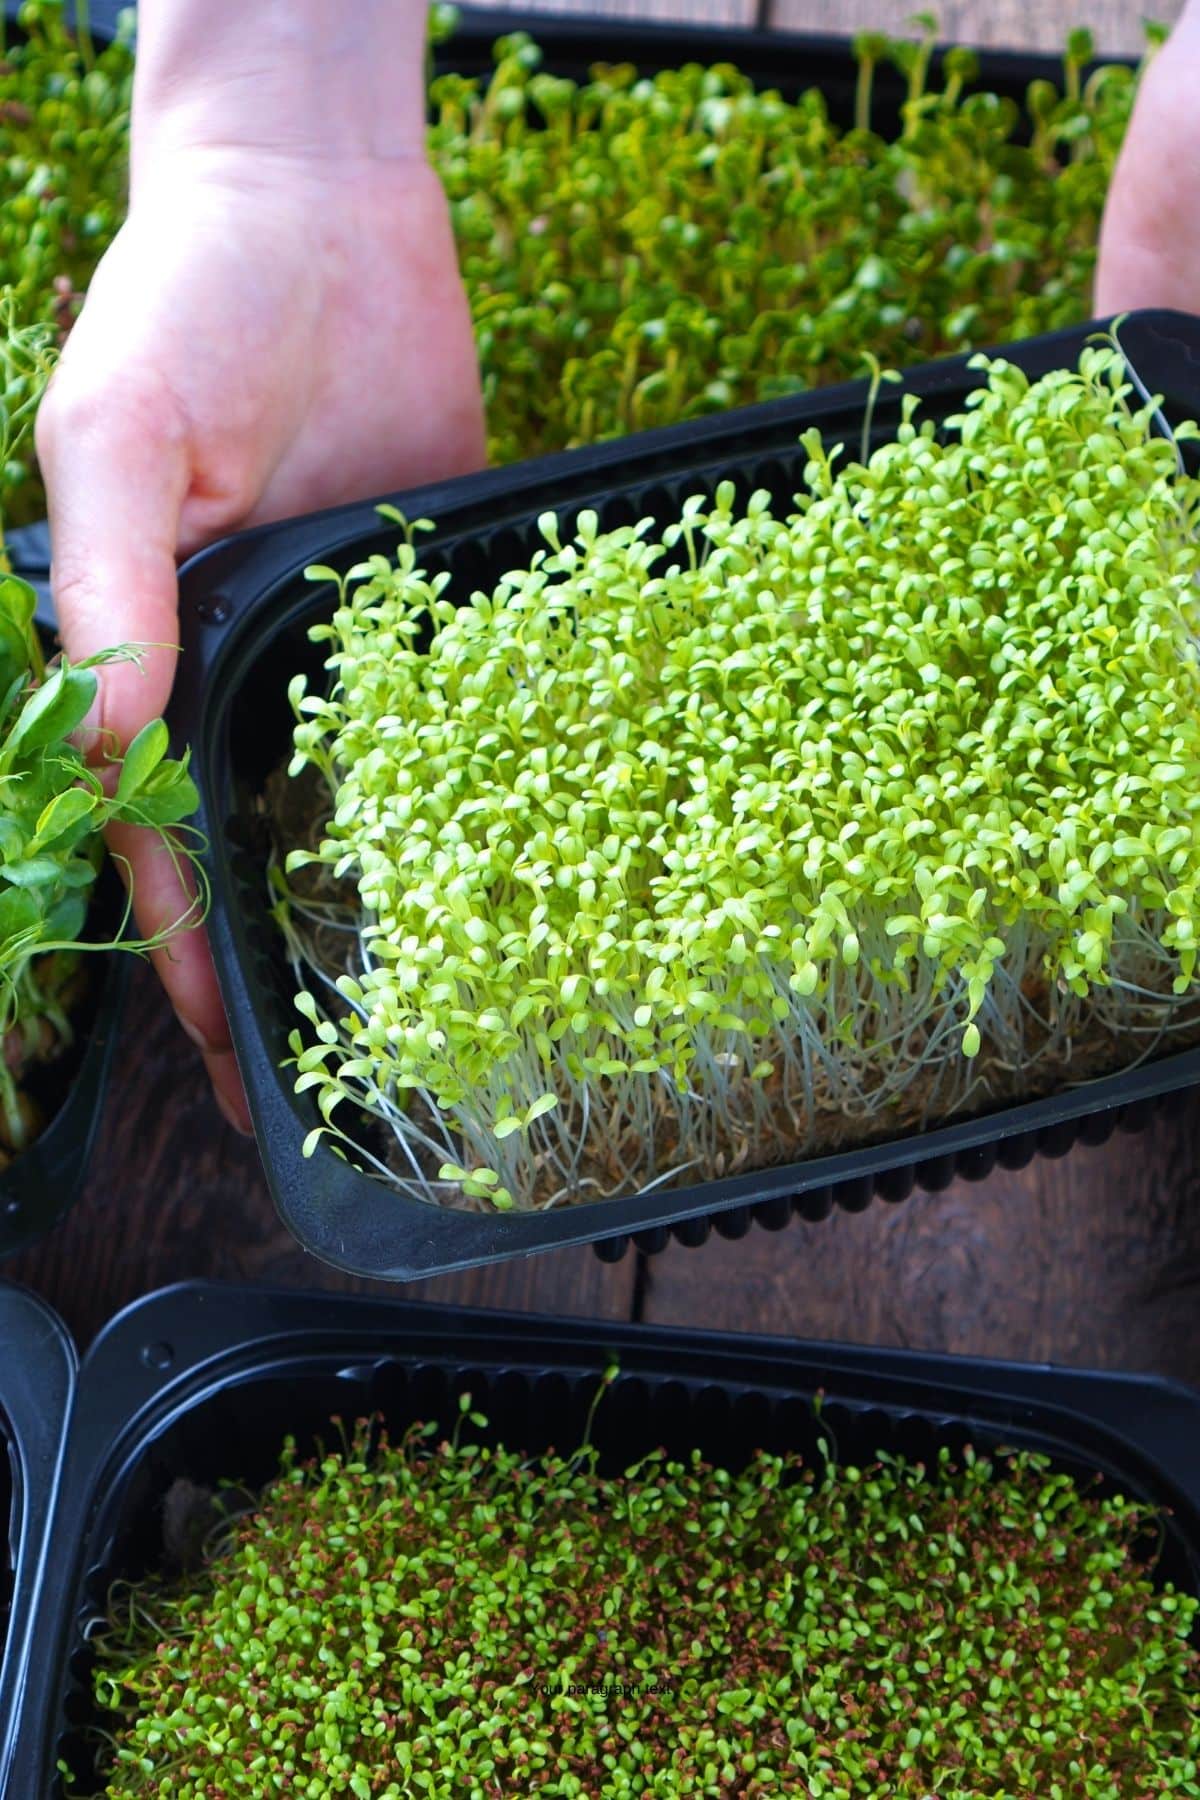 Trays of microgreens being picked up.